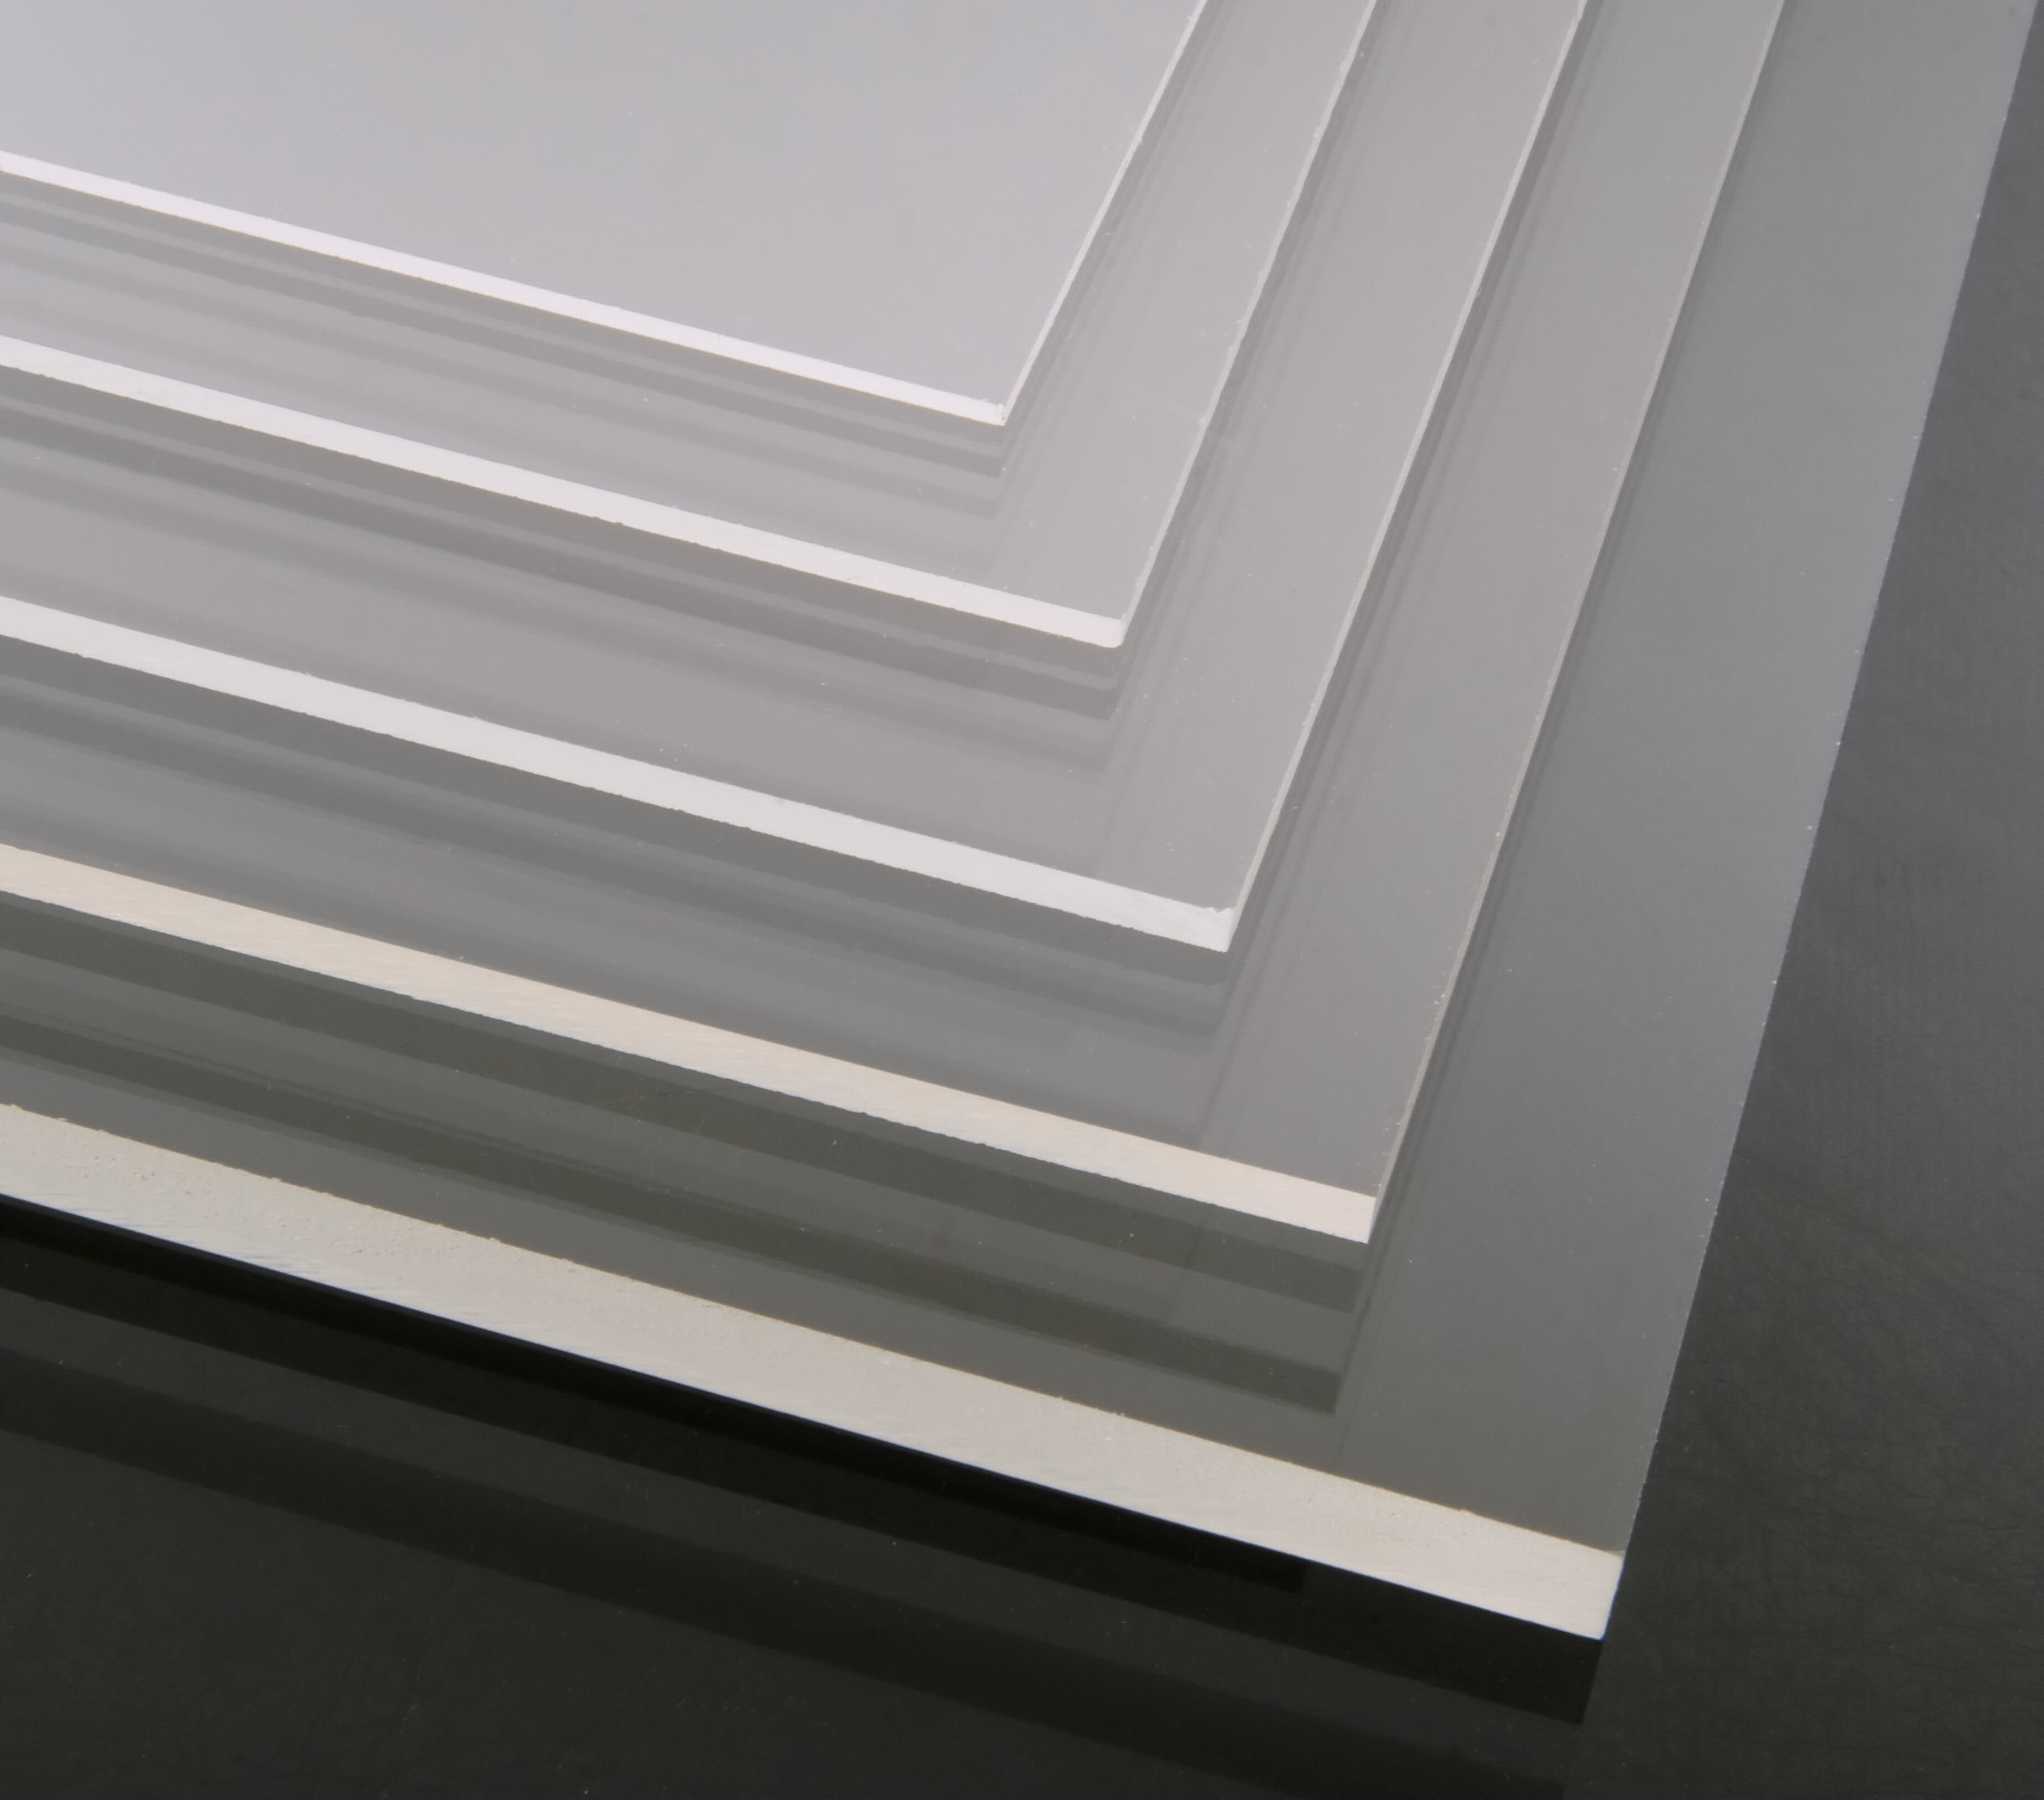 Clear Acrylic Sheet Factory: Providing High-Quality Thin and Thick Clear Acrylic Sheets